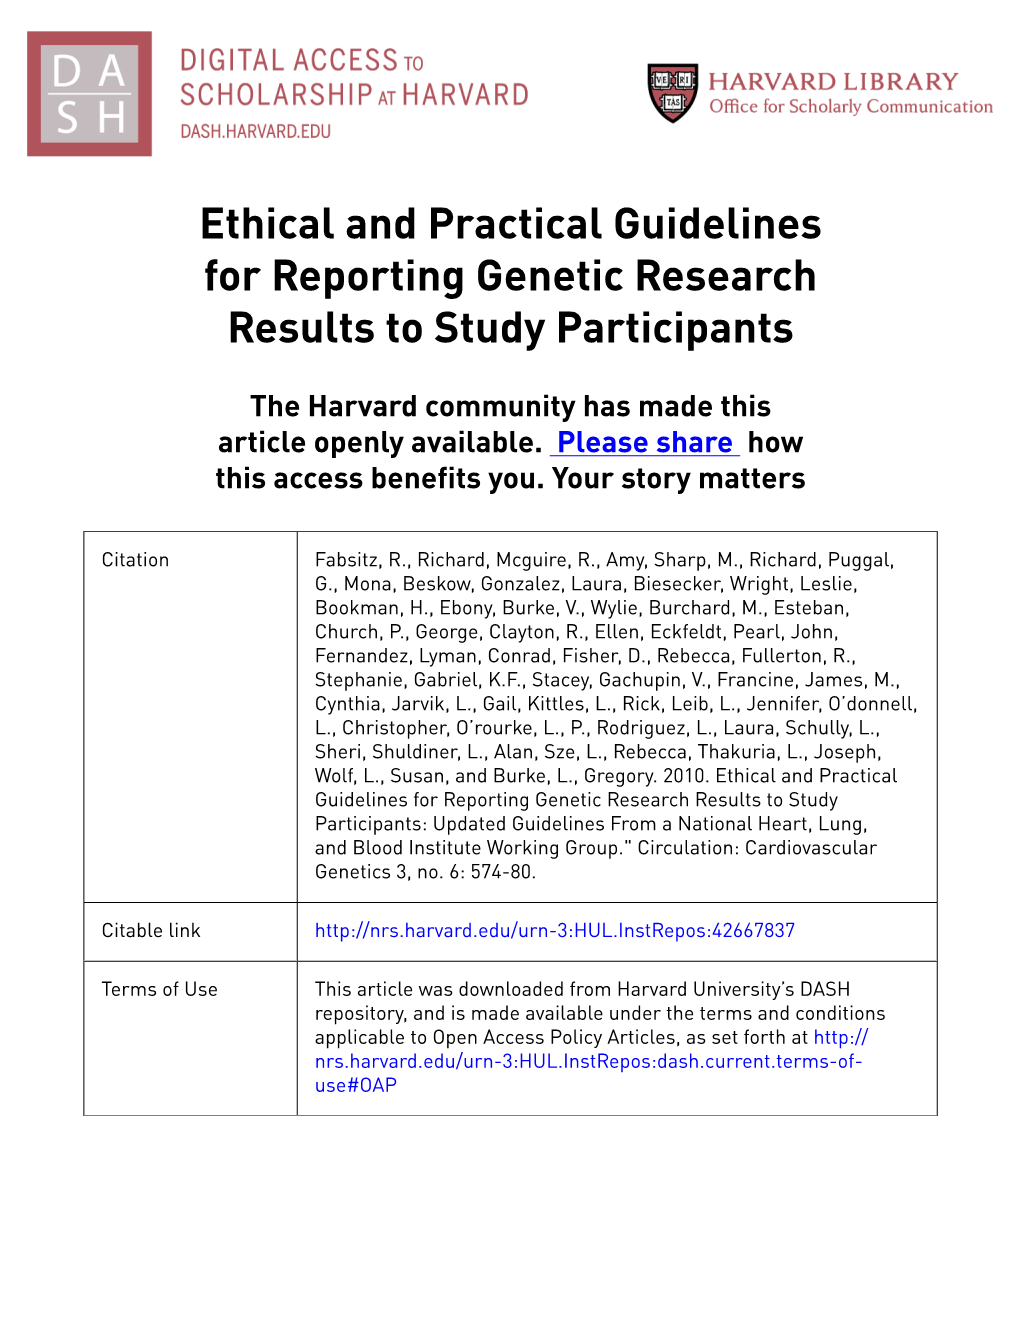 Ethical and Practical Guidelines for Reporting Genetic Research Results to Study Participants